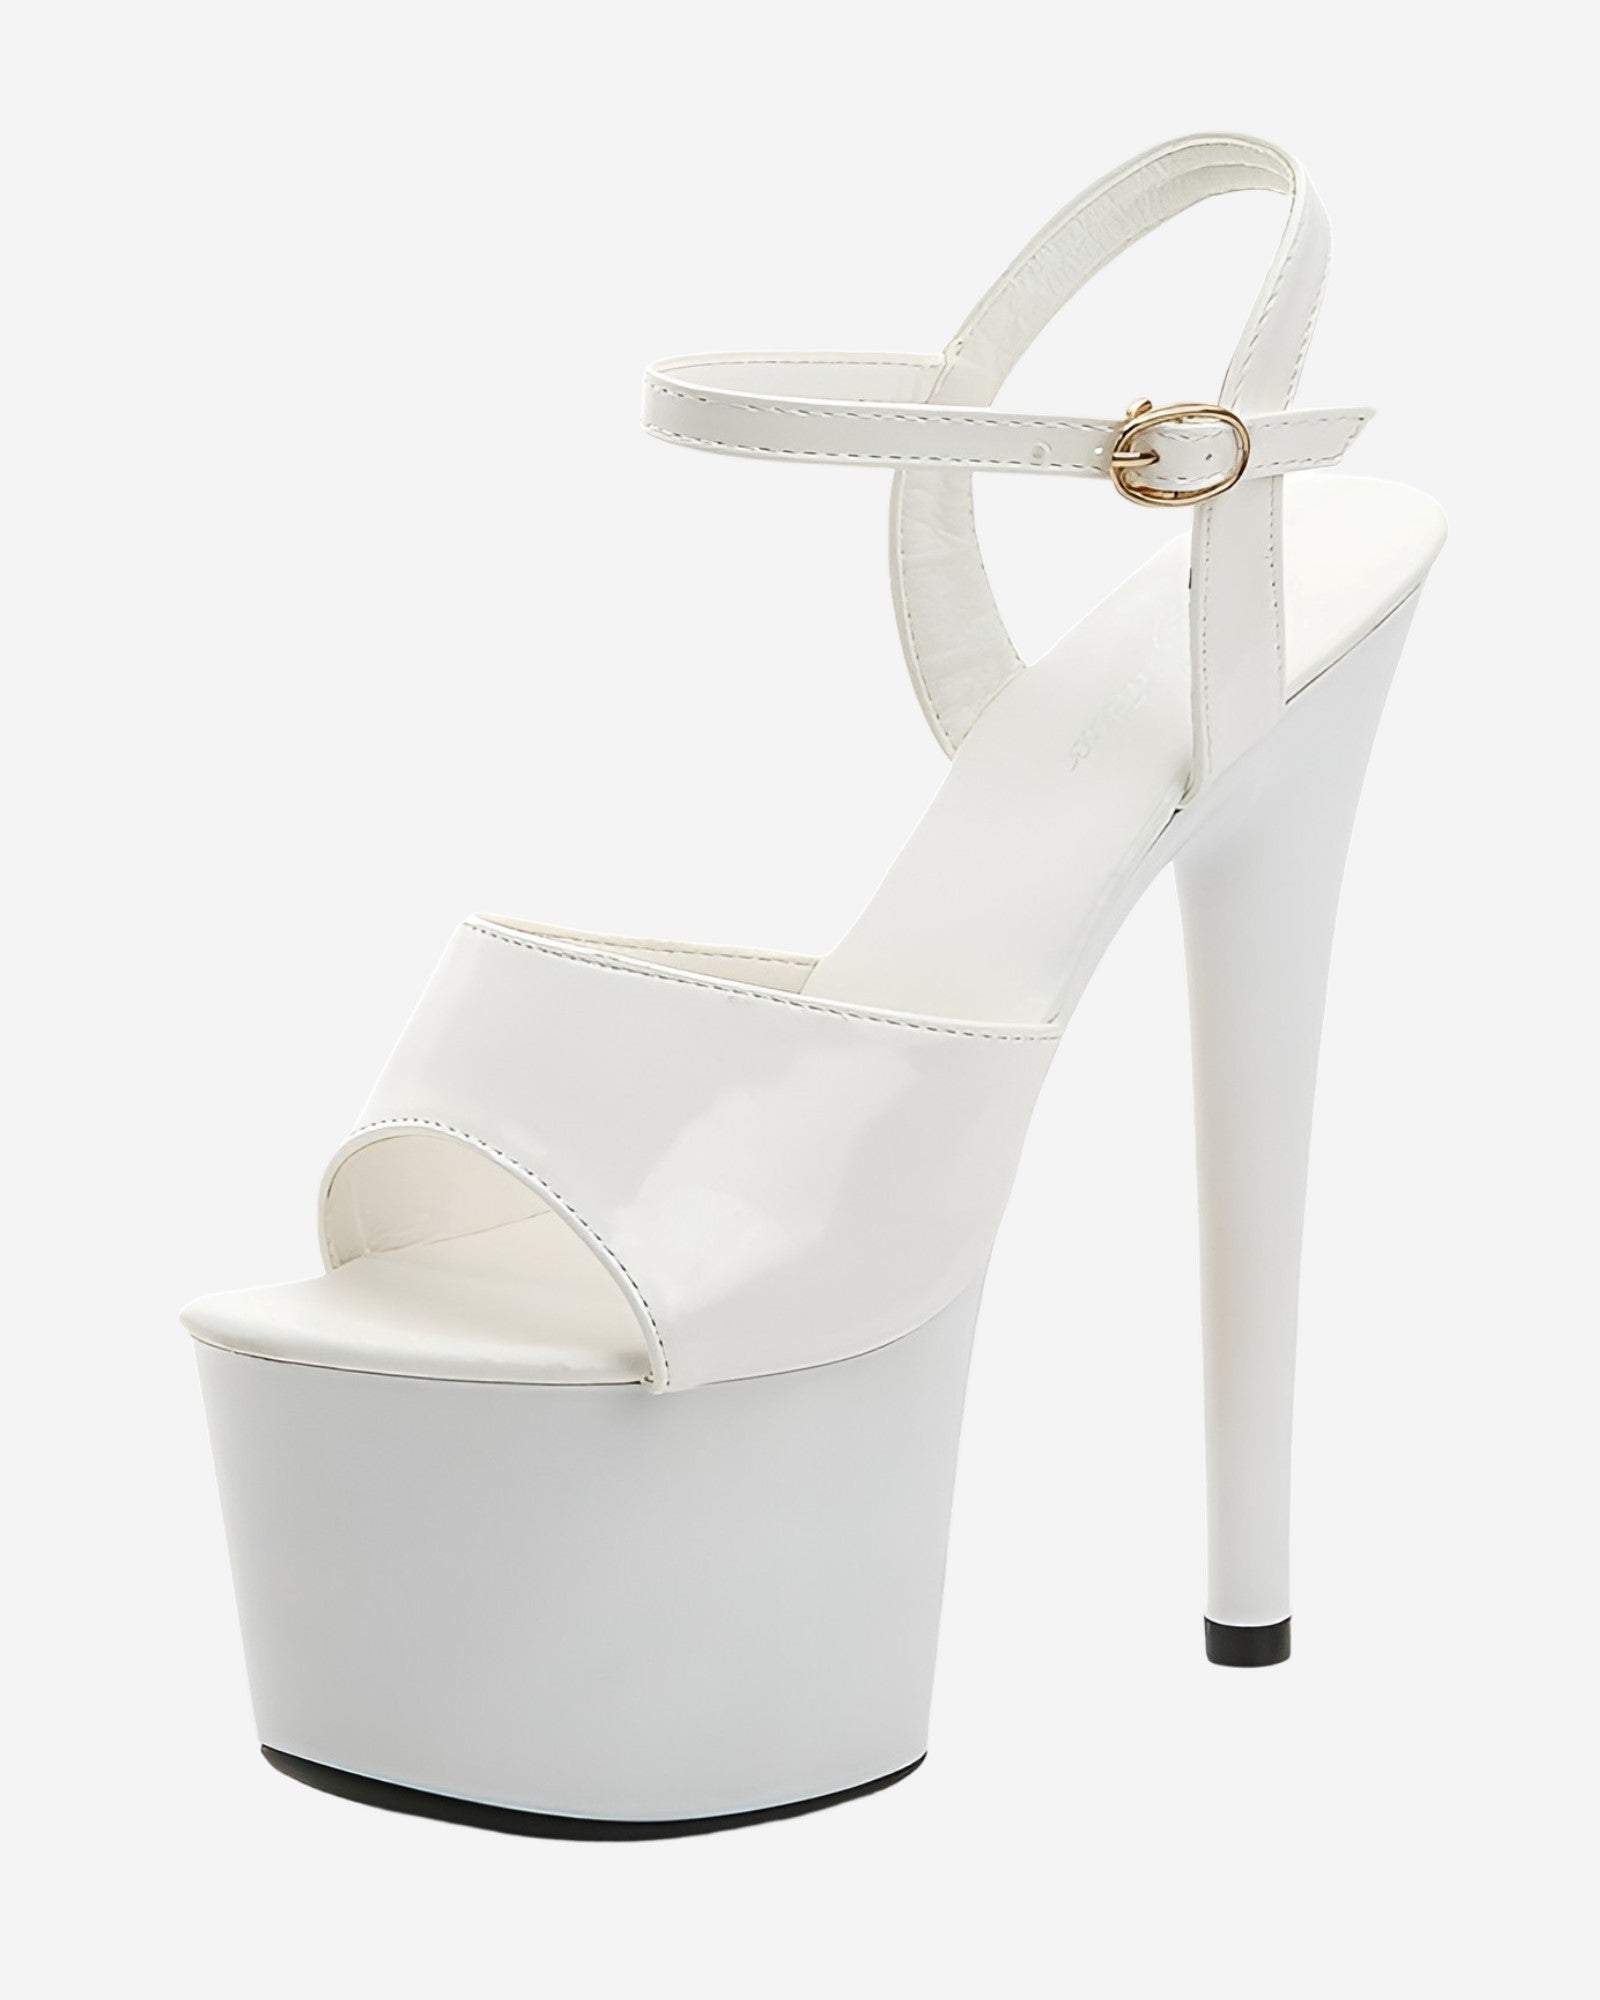 Shoes White Classic Pole Dance High Heels